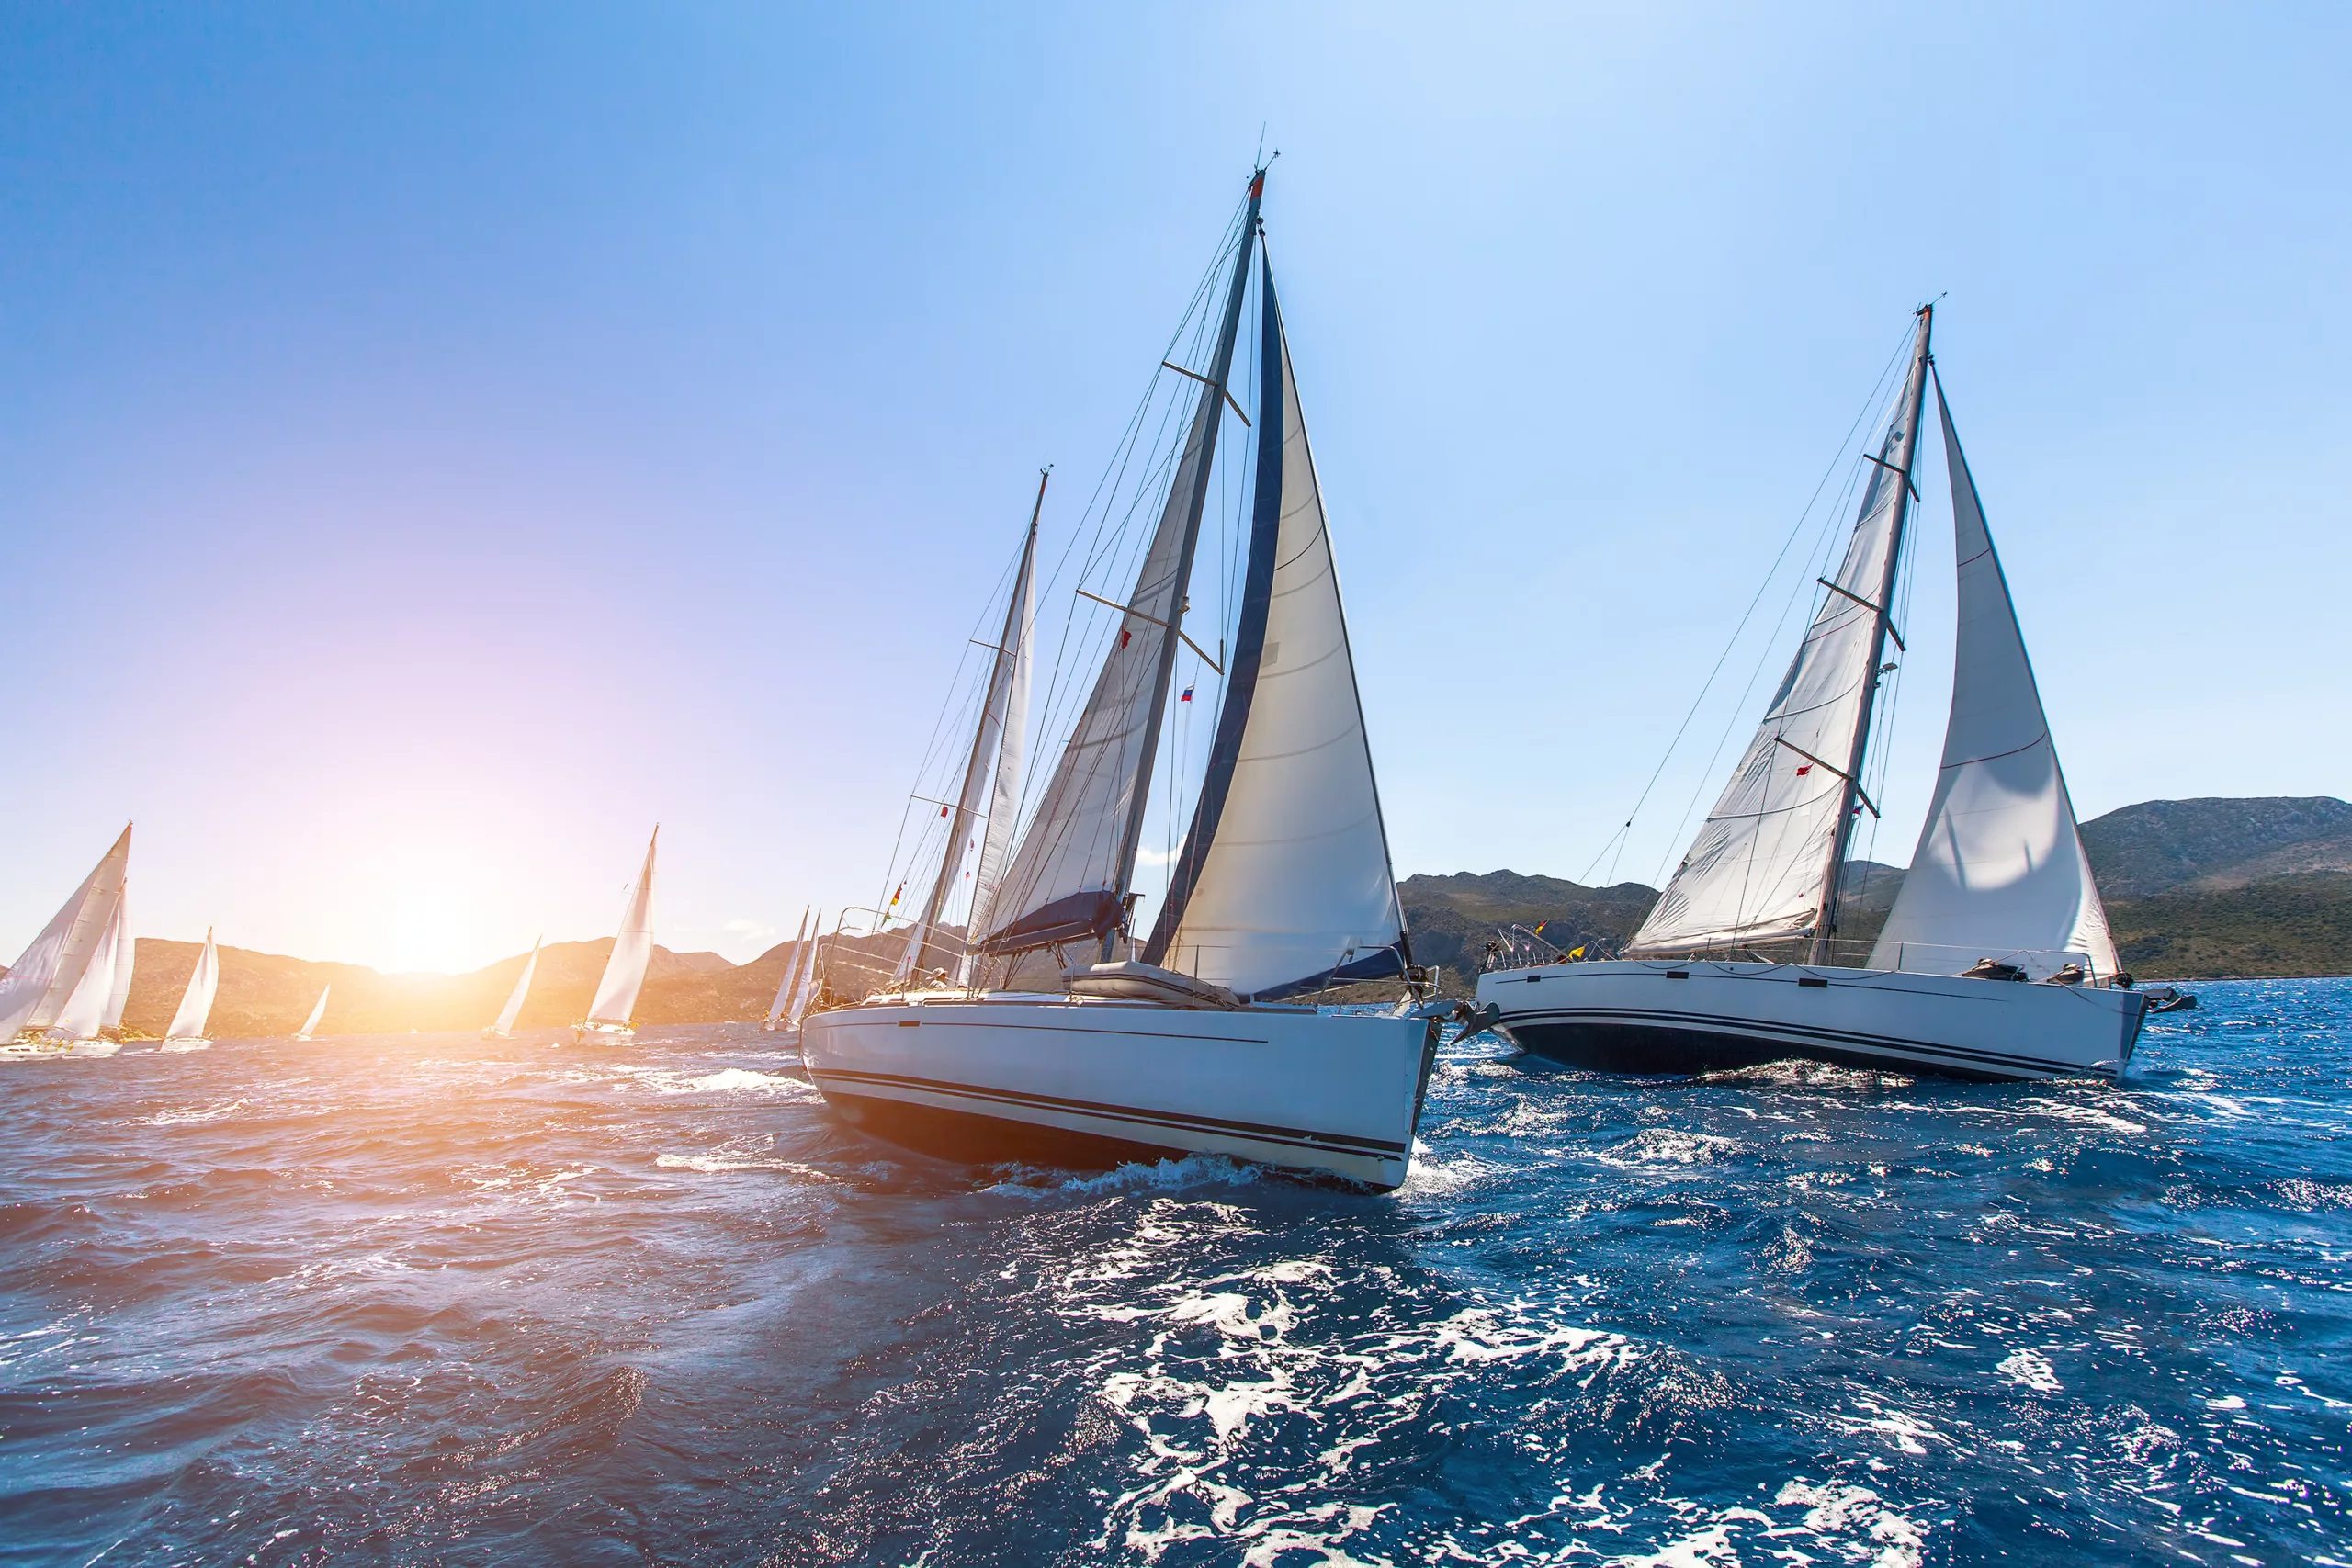 Luxury,Yachts,At,Sailing,Regatta.,Sailing,In,The,Wind,Through,representing business challenges